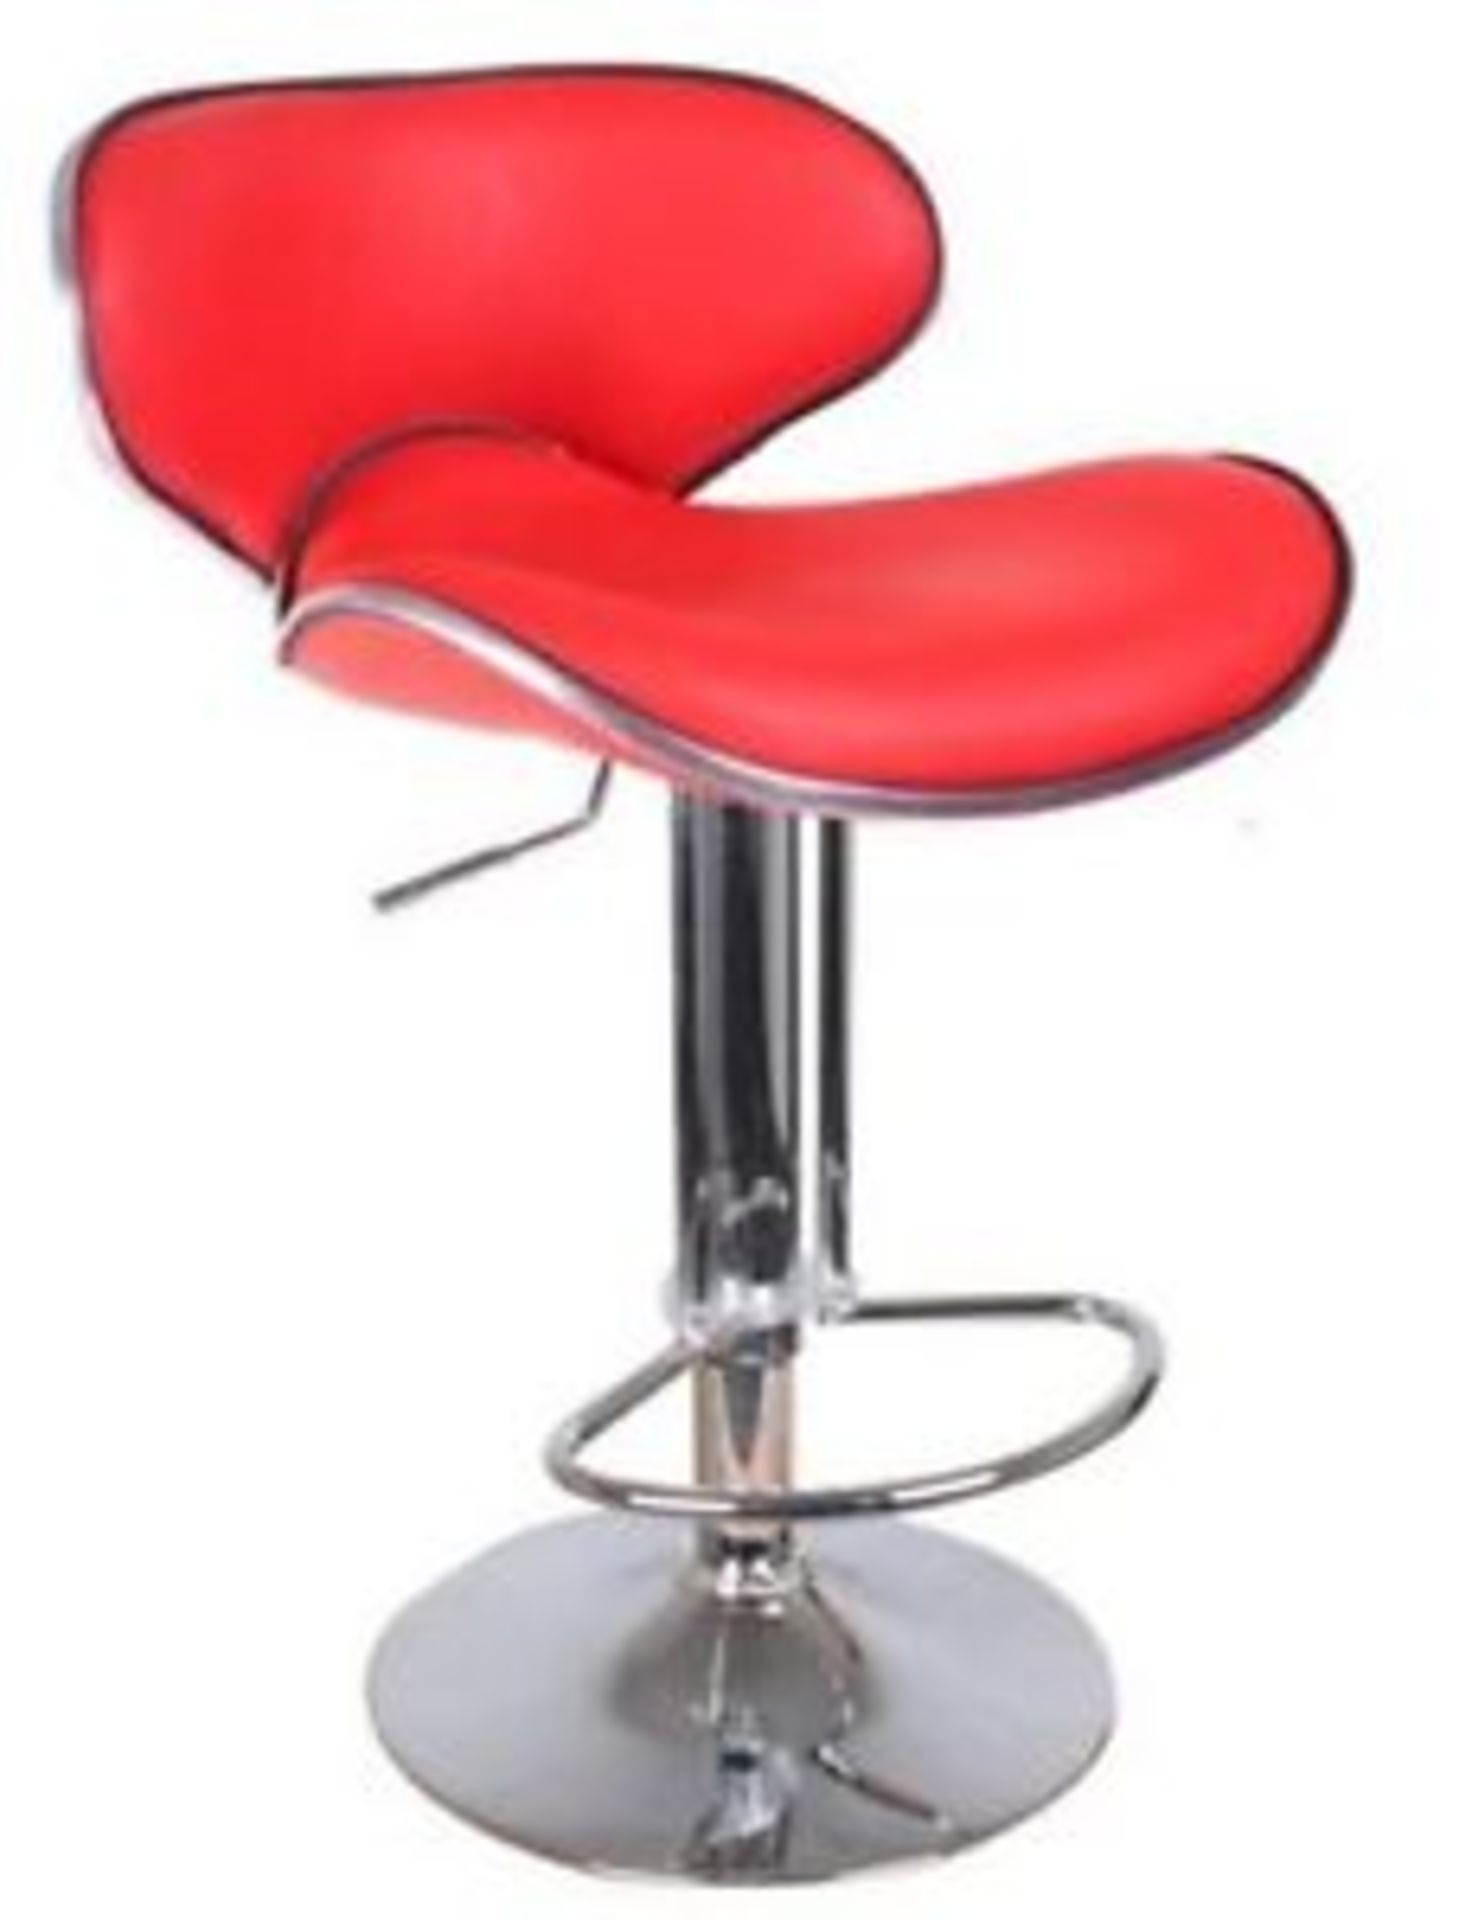 3X SETS OF 4 BARSTOOLS (2X CASINO IN BLACK AND RED 1X ECLIPSE IN BROWN) - Image 3 of 3